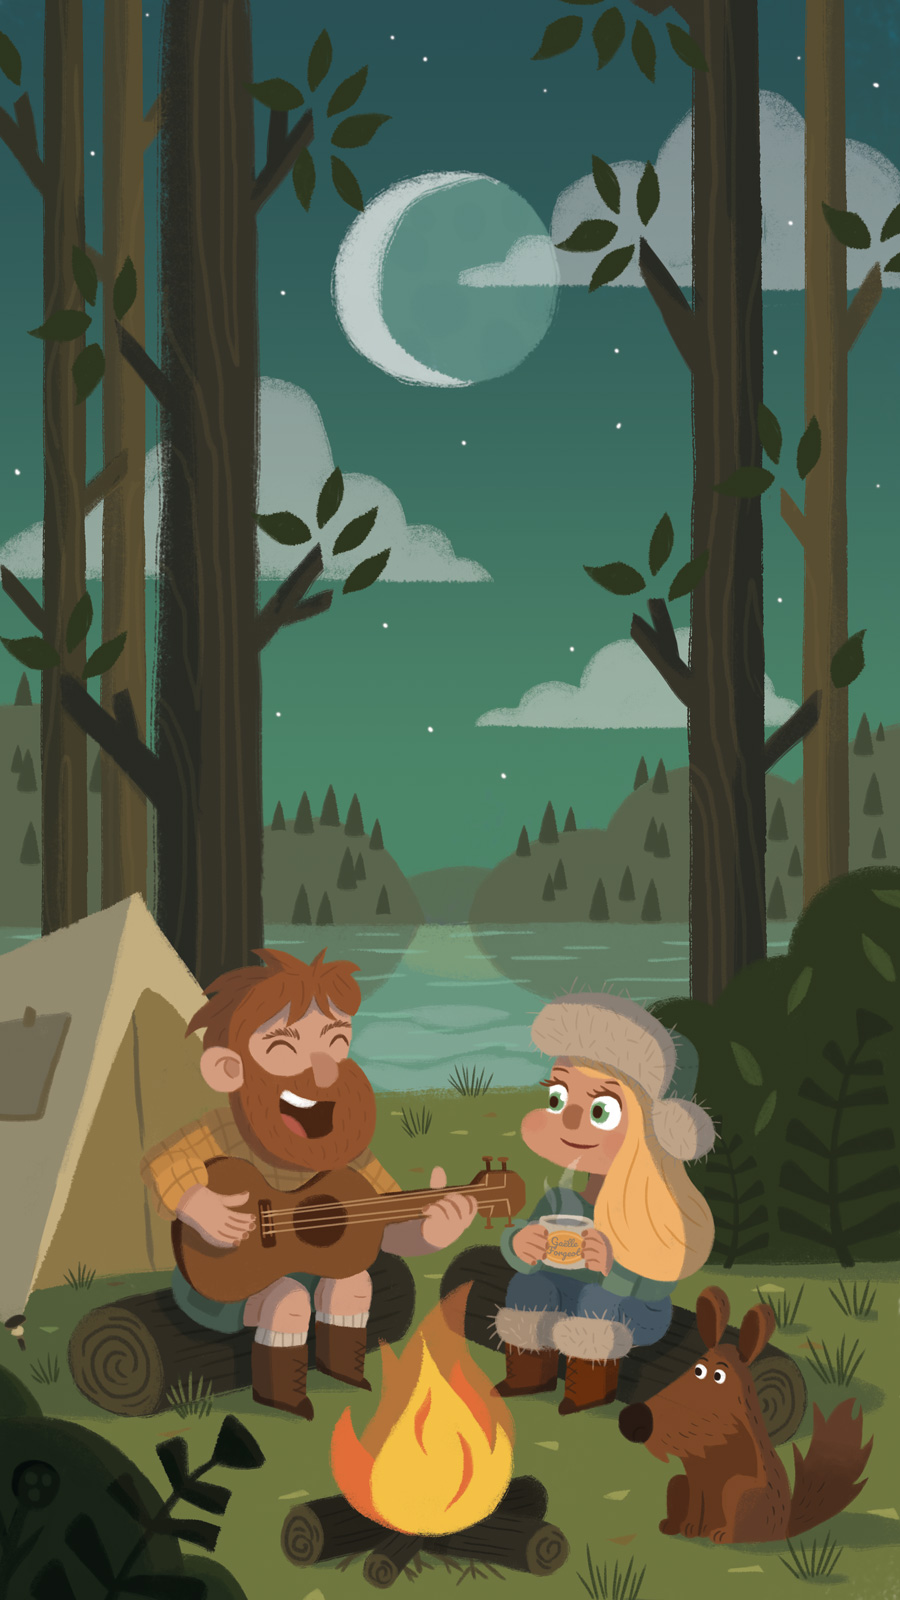 Forest camp